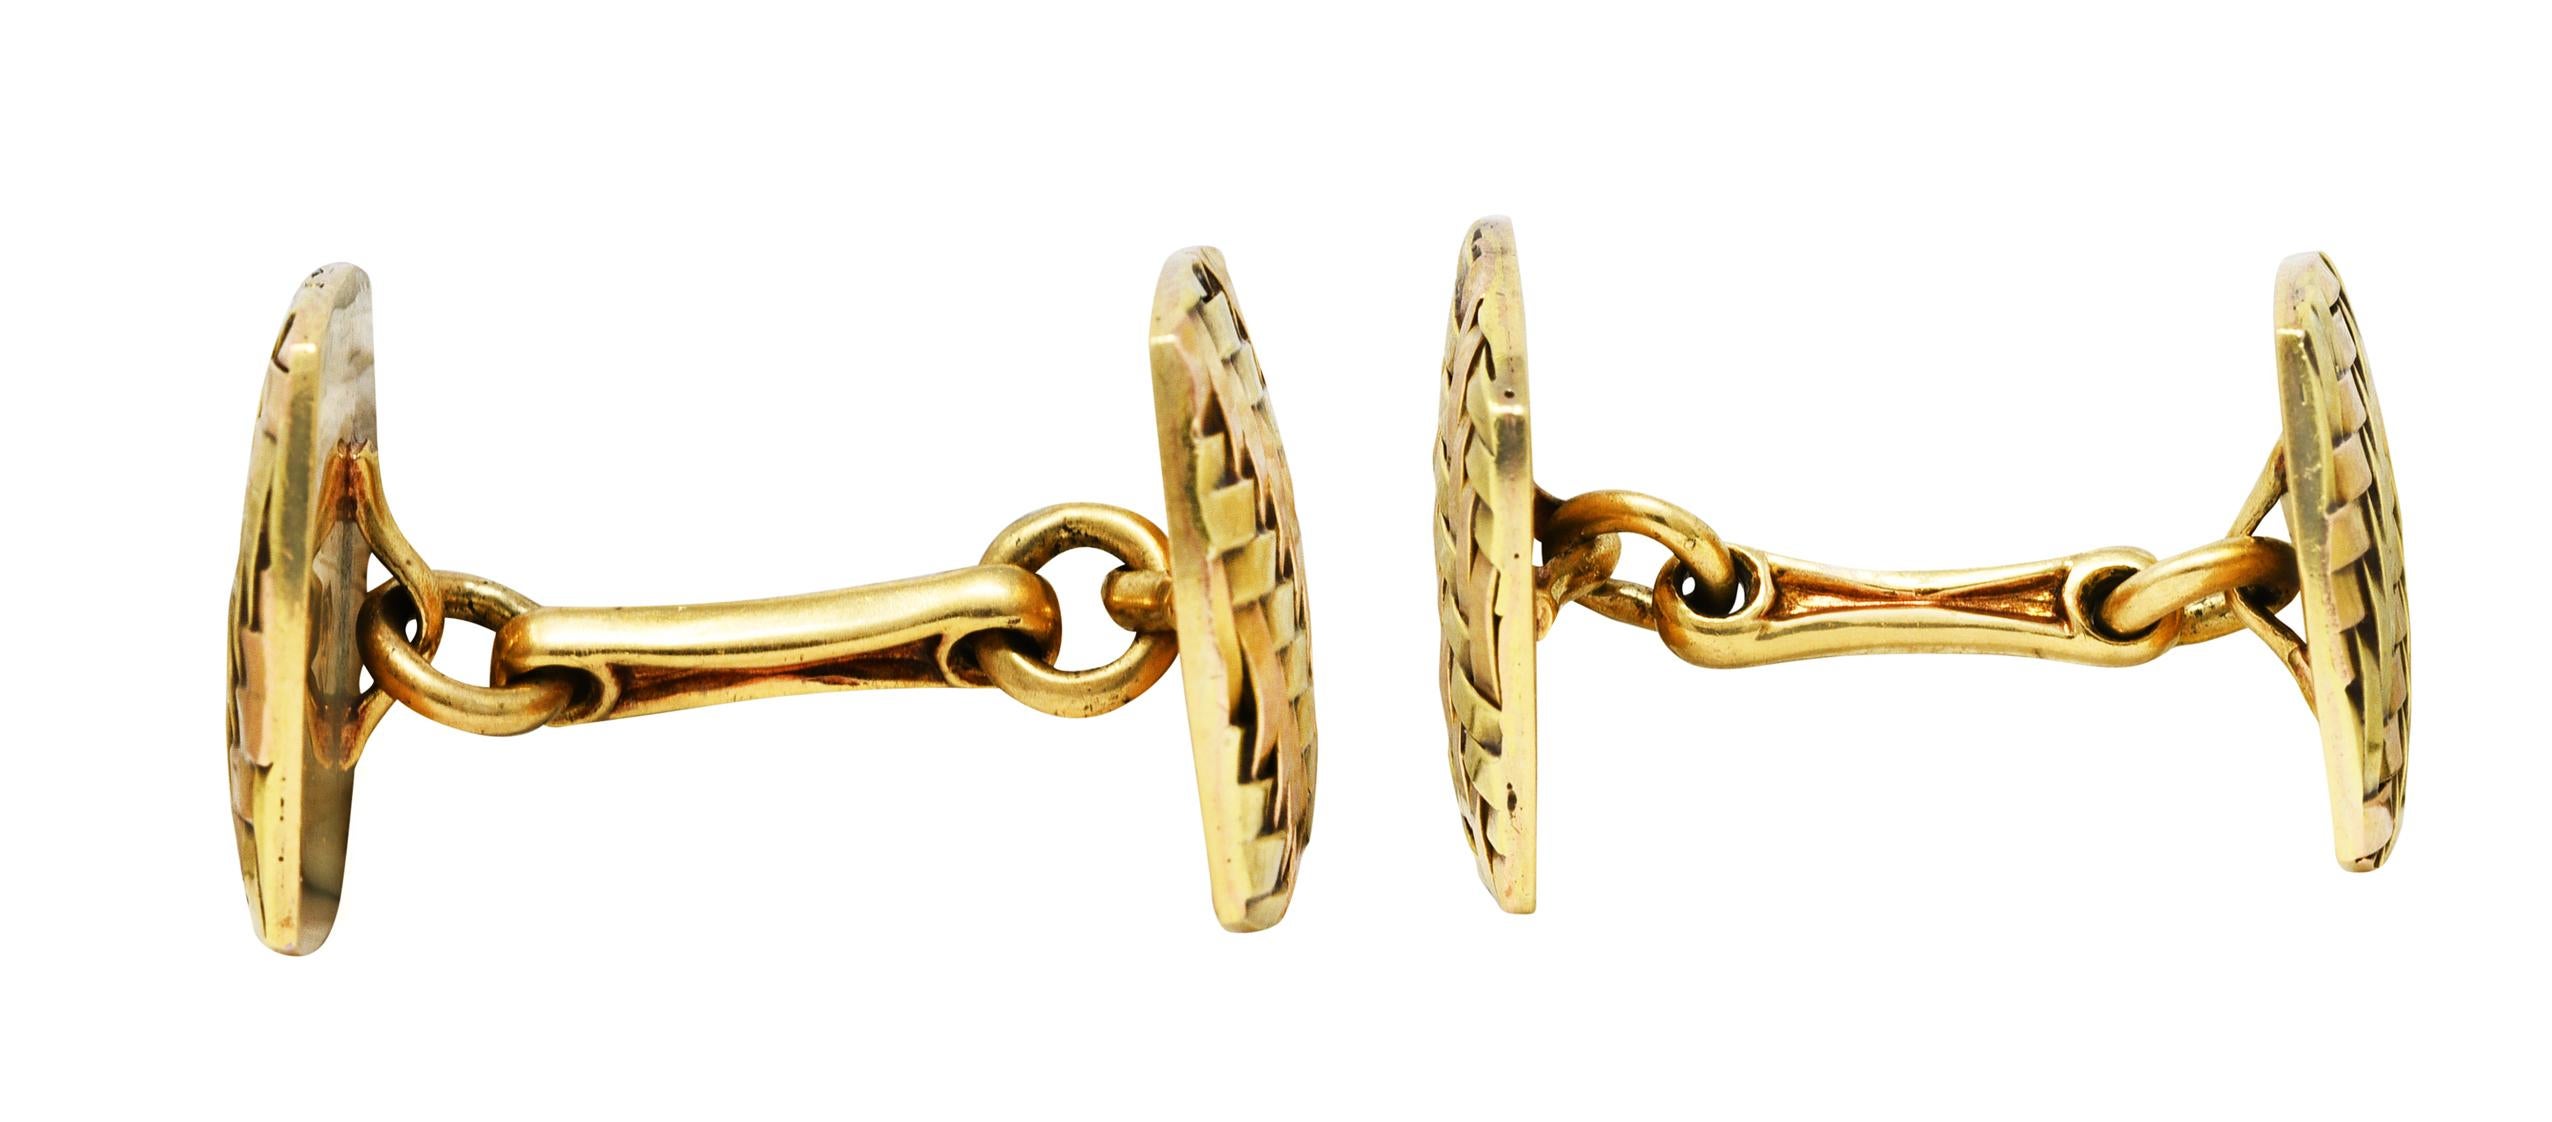 Link style cufflinks terminate as yellow and rose gold cushion forms

With a deeply grooved basket-weave motif throughout

Stamped 14k for 14 karat two-tone gold

Fully signed Cartier with maker's mark

Circa: 1940's

Length: 1 3/16 inches

Cushions